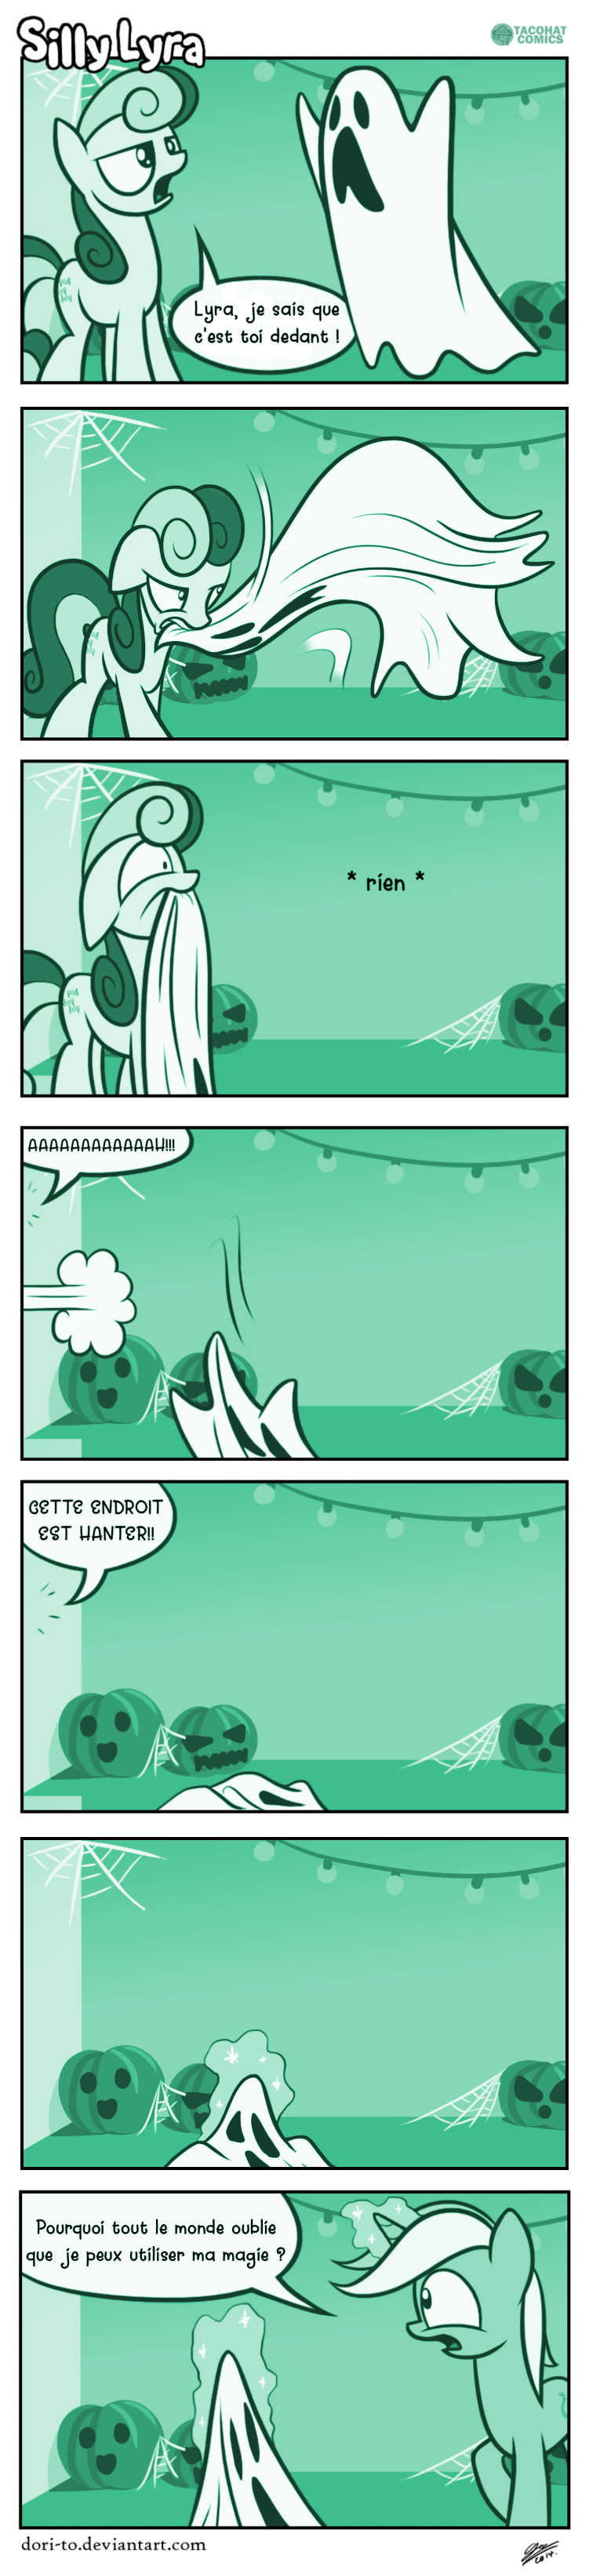 Comic #2 - If You Have Ghosts